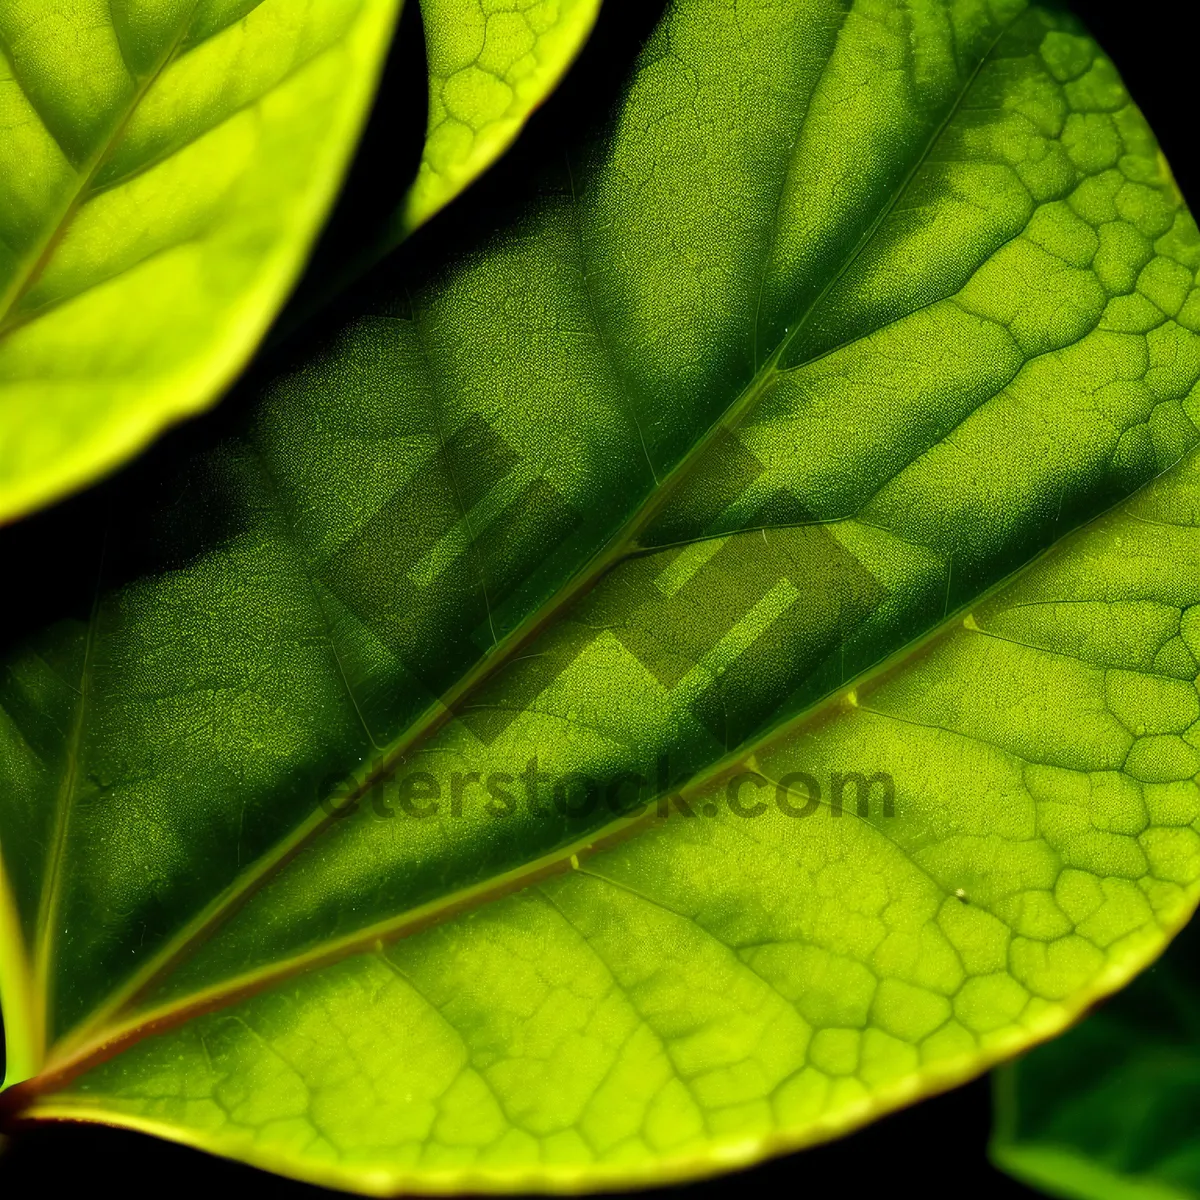 Picture of Vibrant Organic Green Leafy Snake Bean Texture